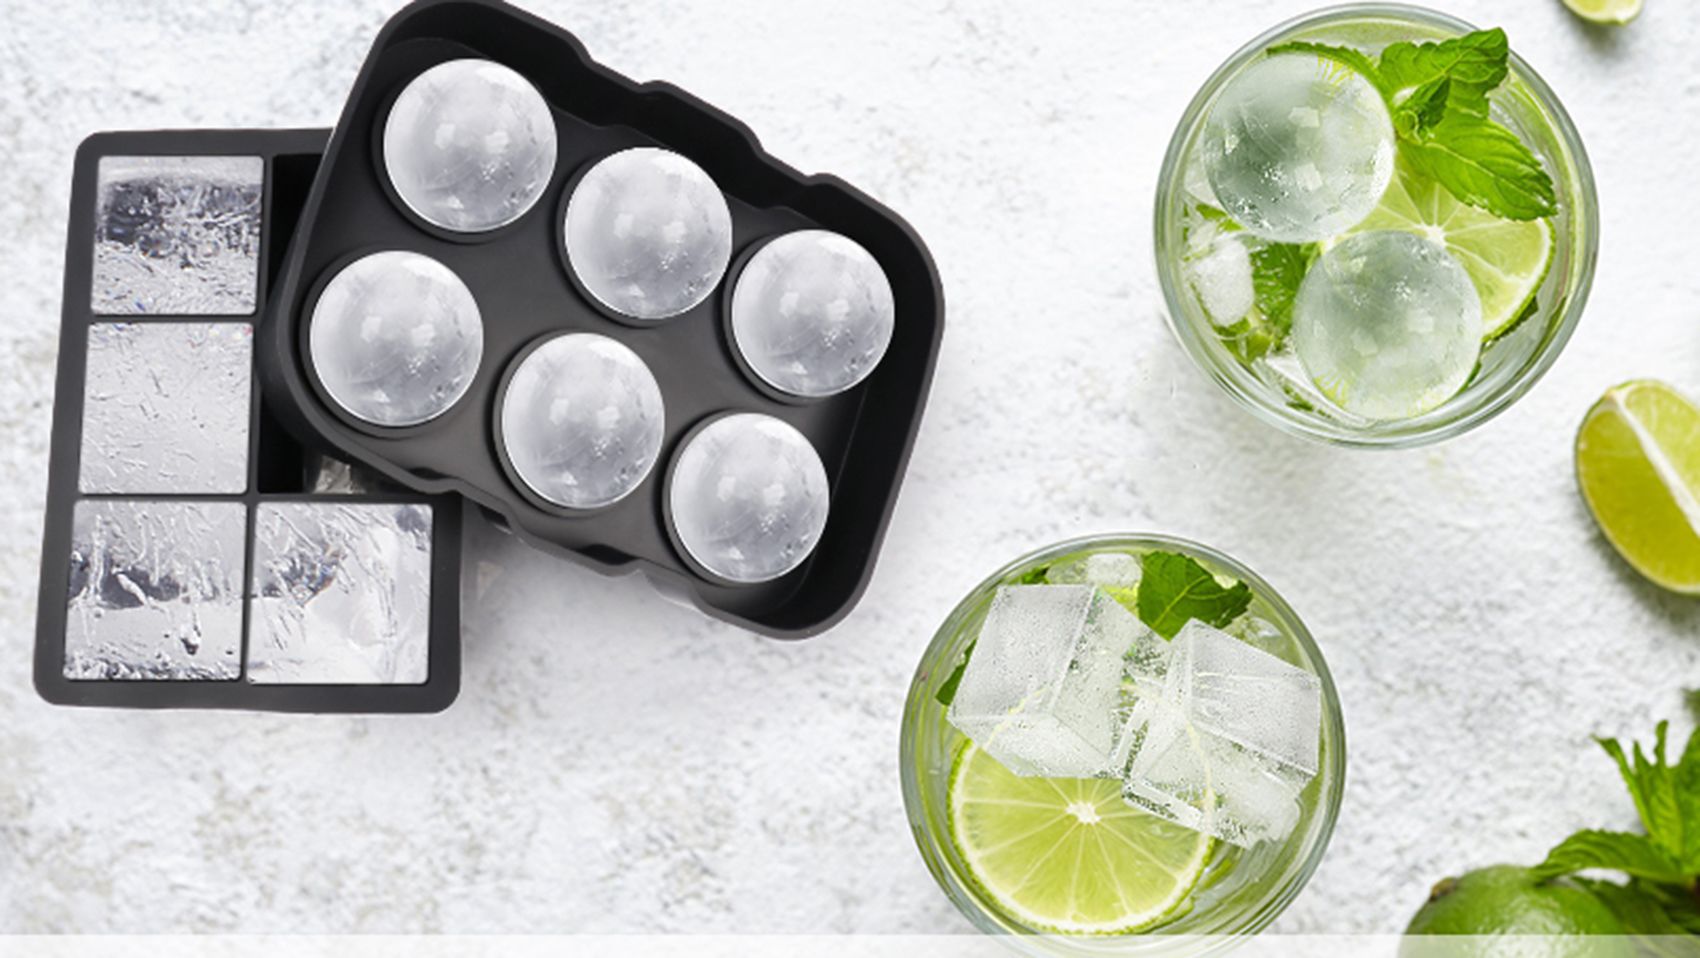 Decorative Ice Cubes  Fancy Ice Cubes - The Mindful Mocktail